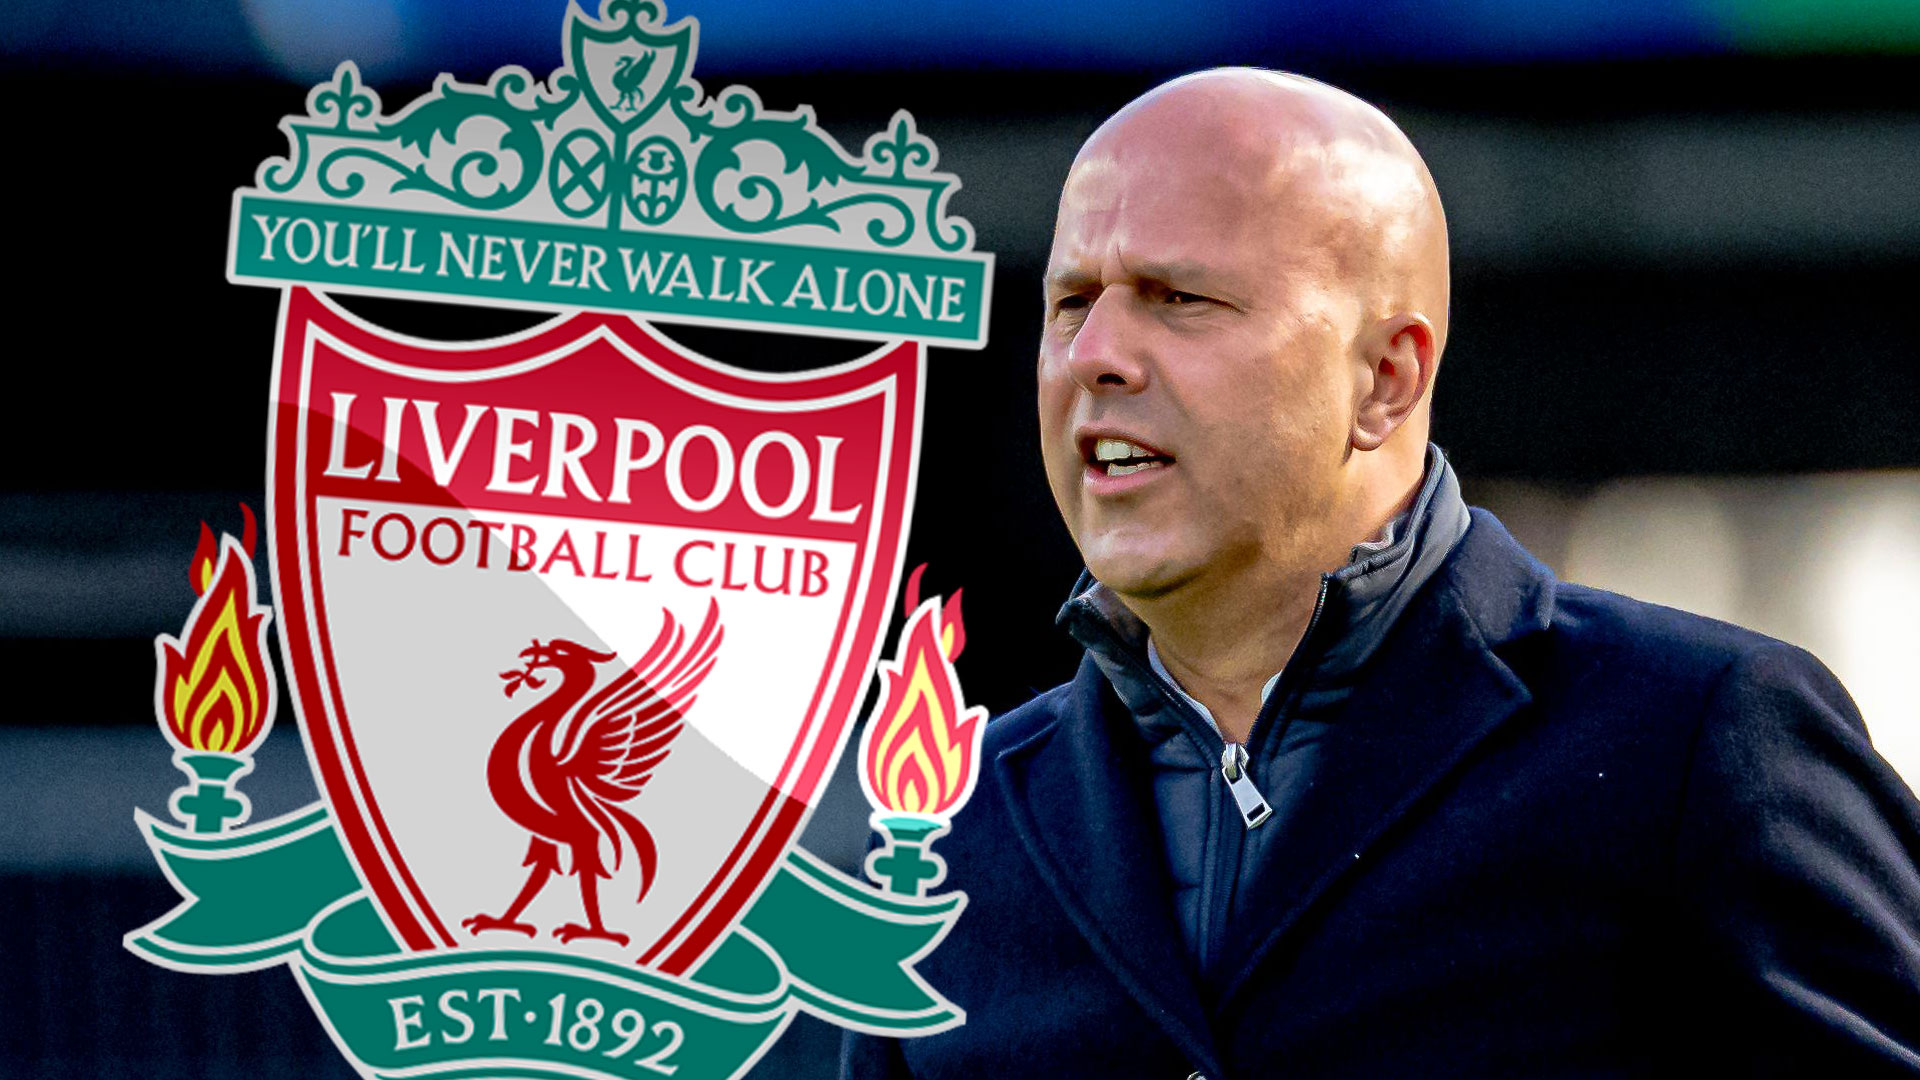 Arne Slot to become new Liverpool manager as £9.4m deal agreed for Feyenoord boss to replace Jurgen Klopp